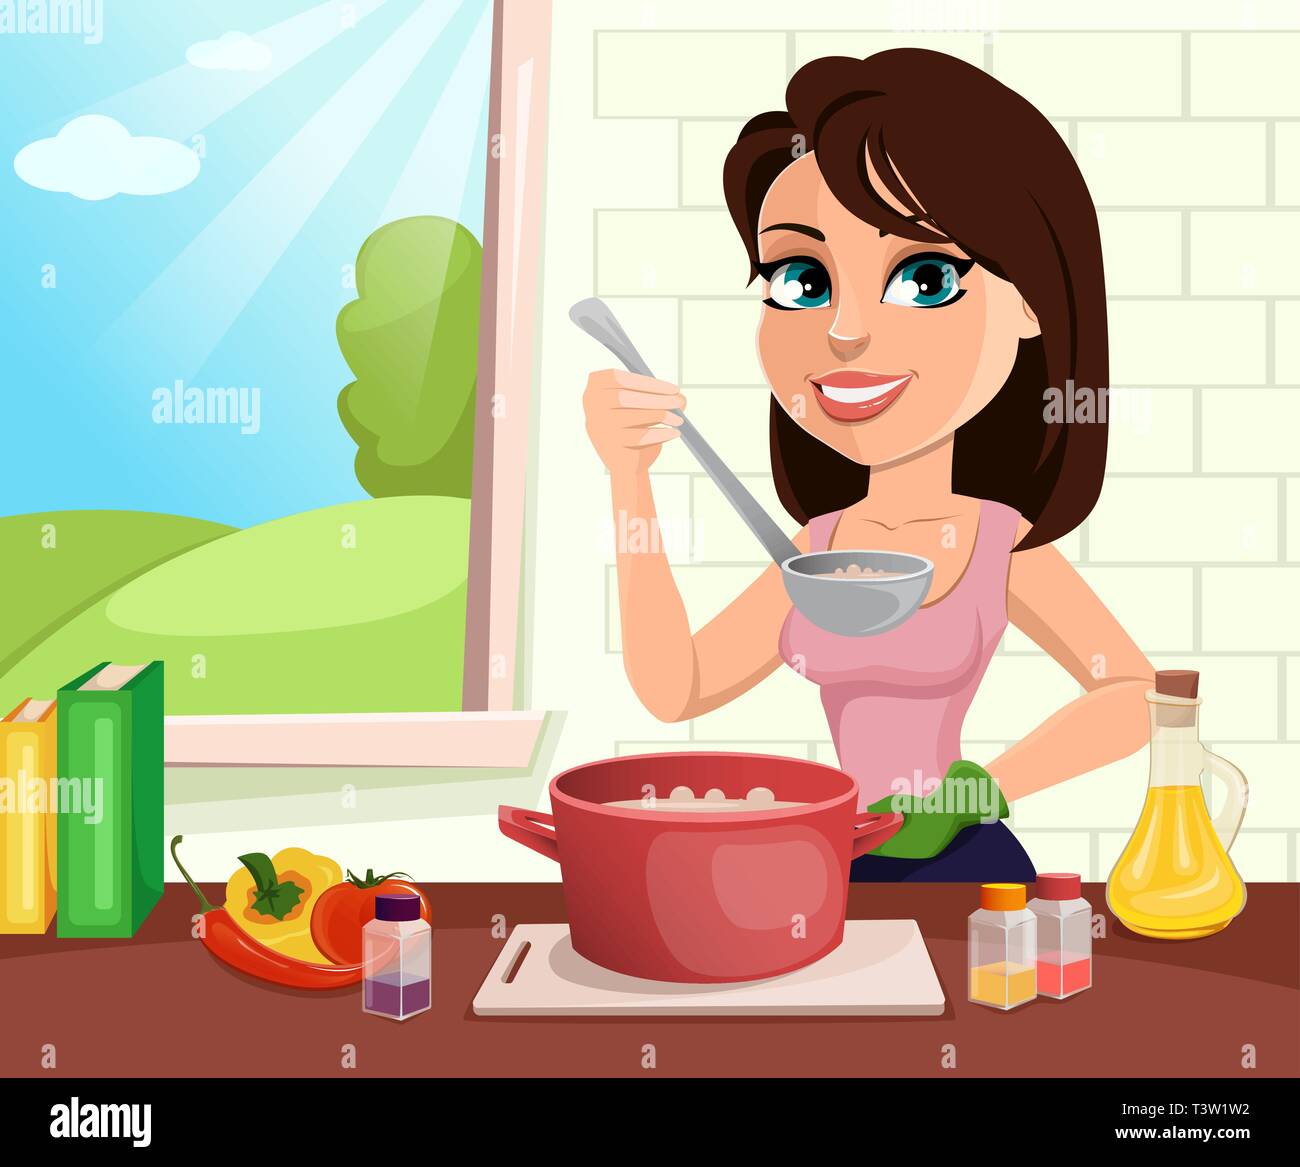 Beautiful Woman Cooking In Her Kitchen Cute Lady Cartoon Character Vector Illustration Stock 